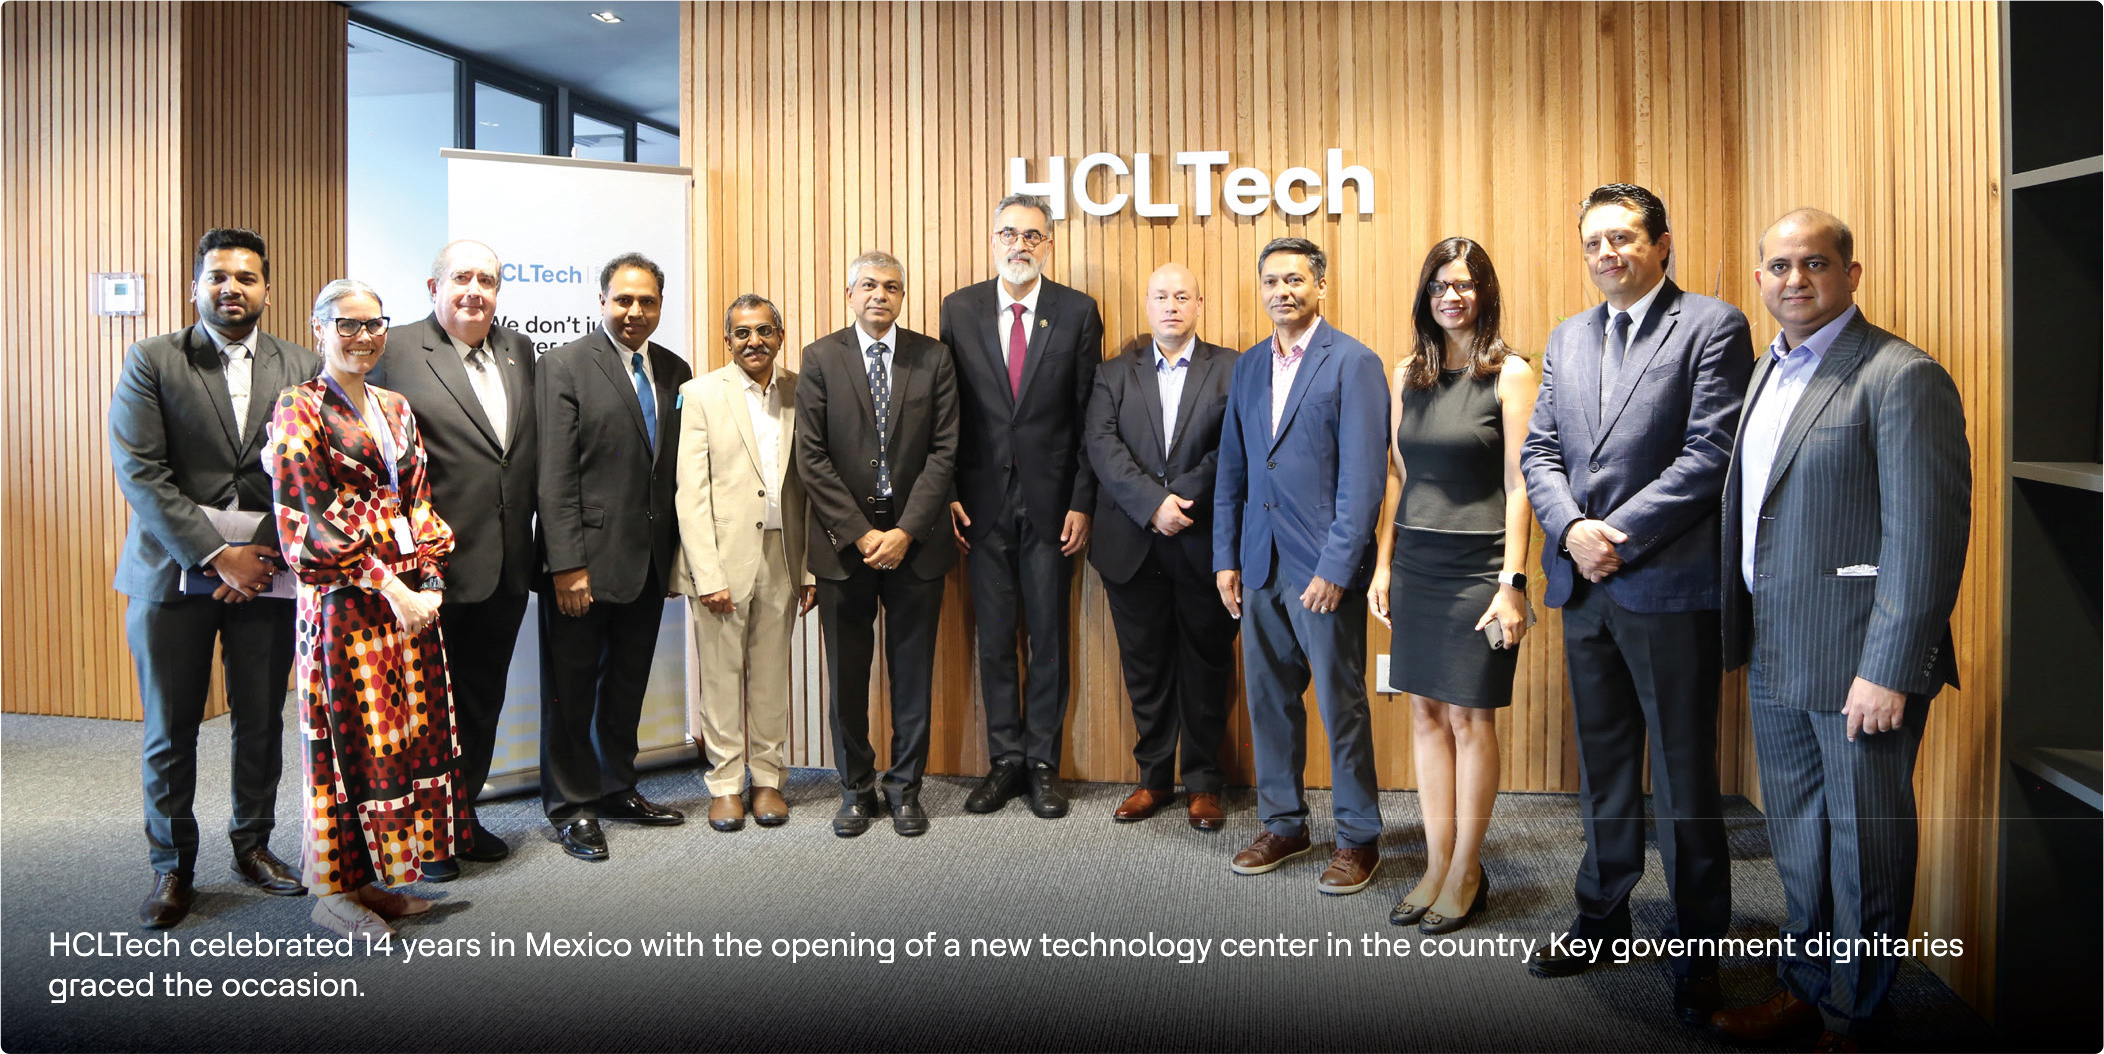 HCLTech celebrated 14 years in Mexico with the opening of a new technology center in the country. Key government dignitaries graced the occassion.